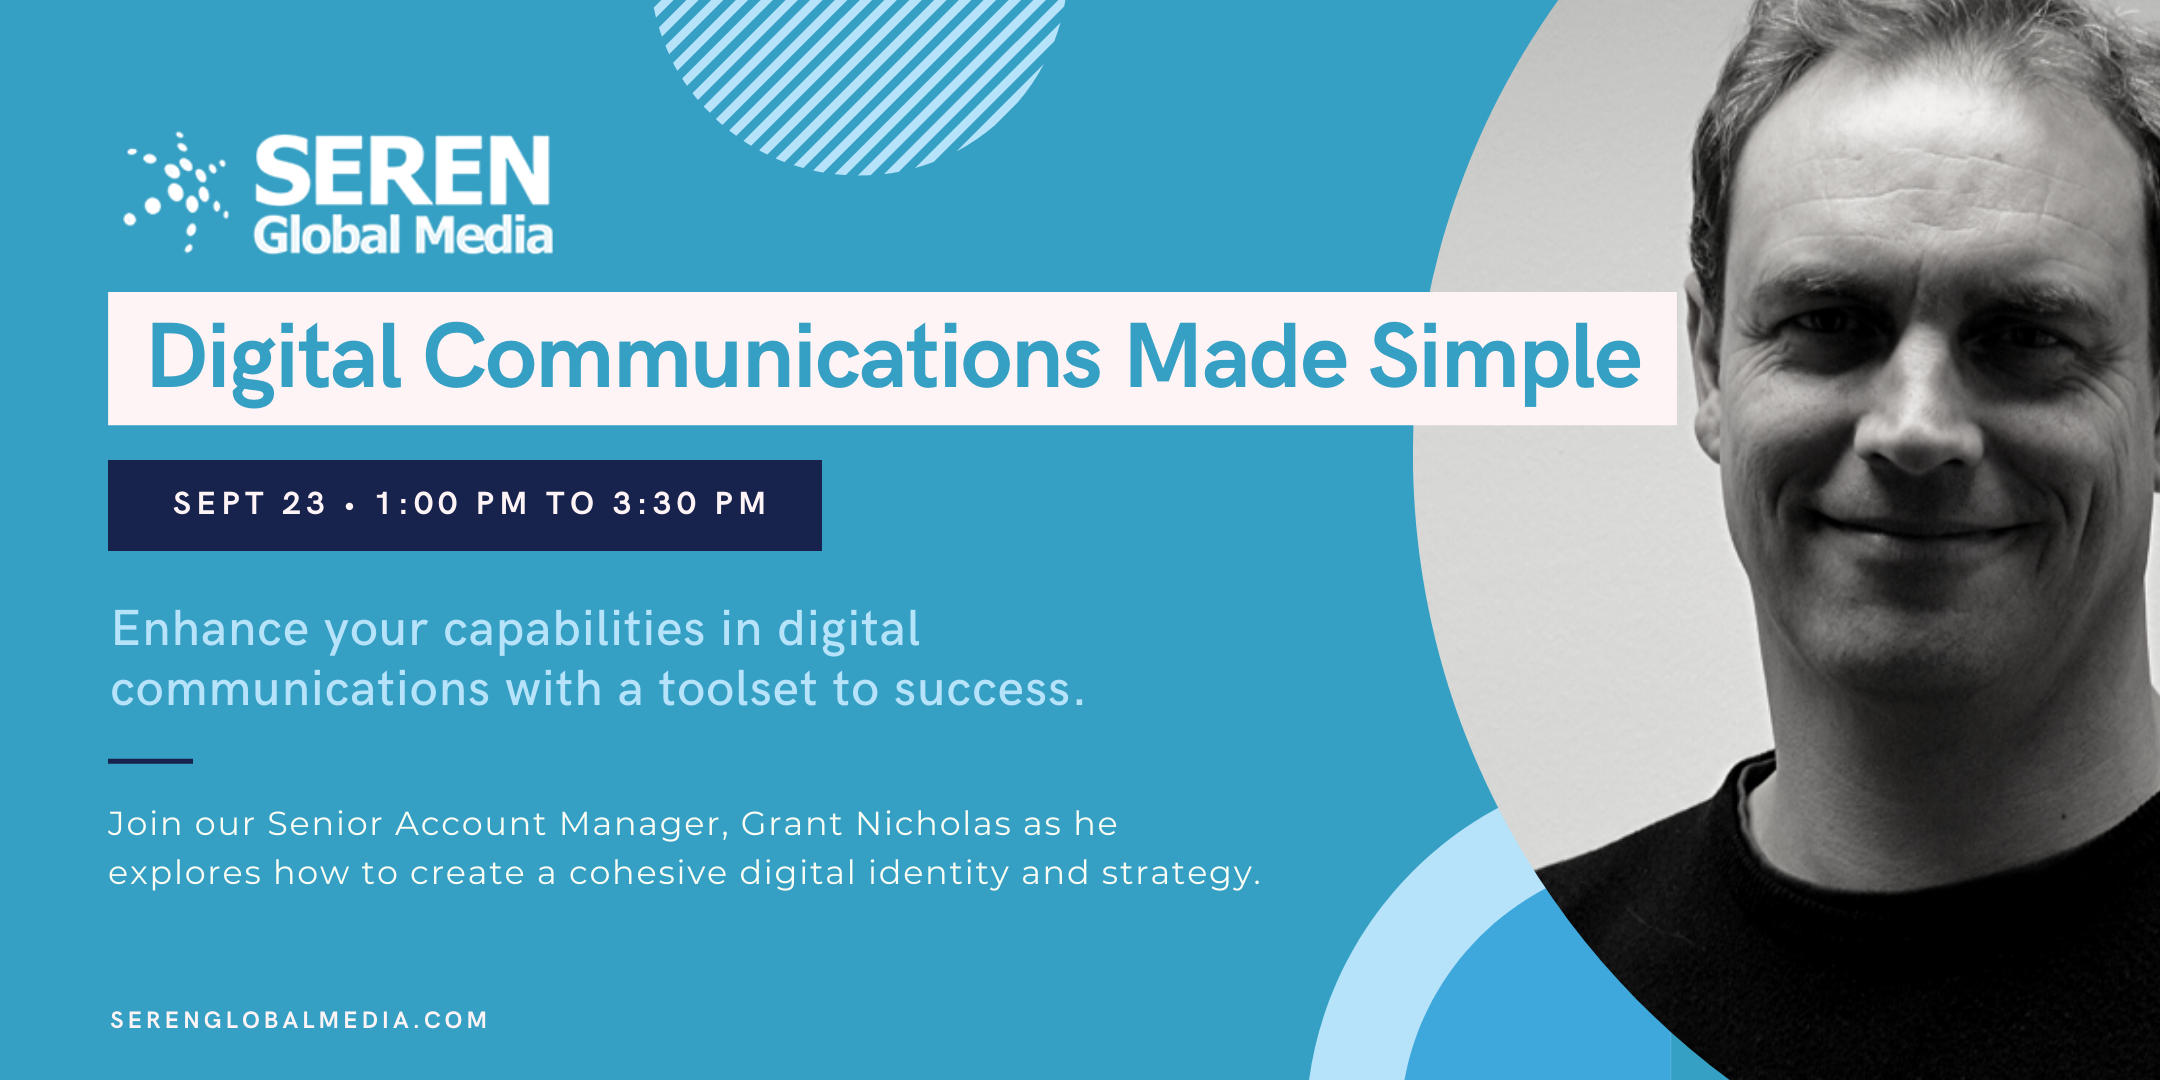 Sign up for our new online course: Digital Communications Made Simple